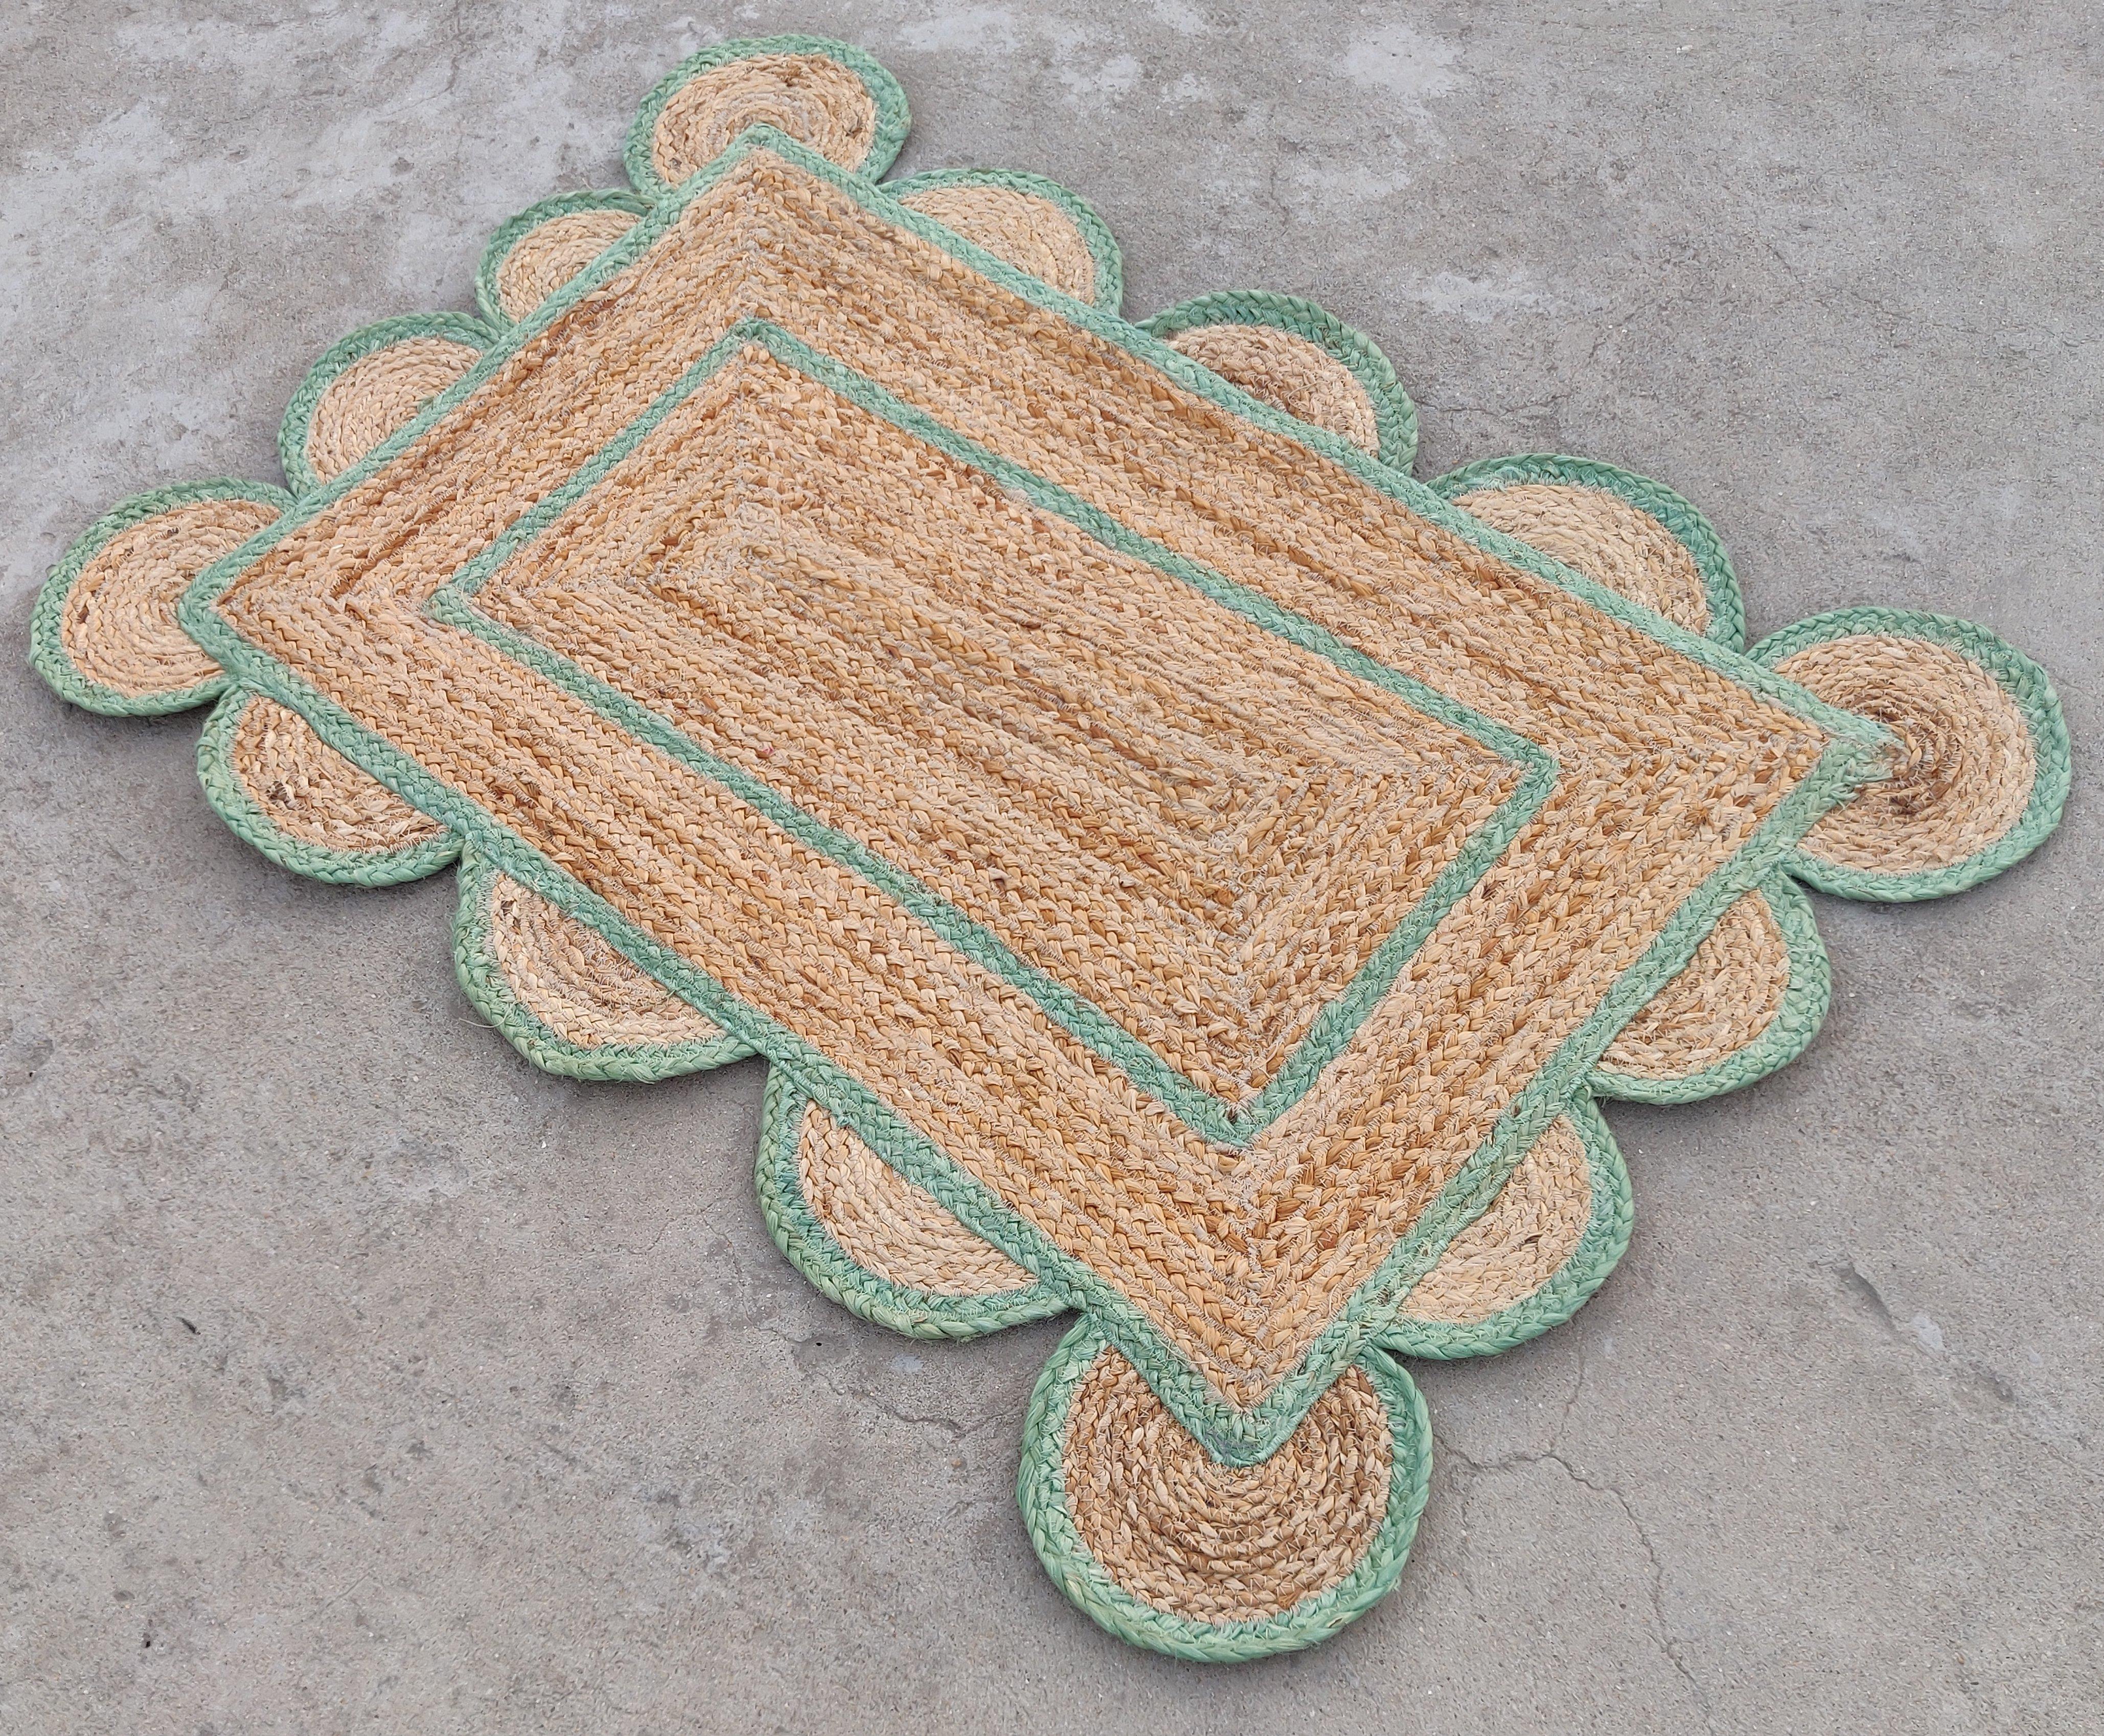 Handmade Jute Scalloped Rug, Natural Jute Dhurrie with Green Border -2'x3'

These special flat-weave dhurries are hand-woven with 15 ply 100% cotton yarn. Due to the special manufacturing techniques used to create our rugs, the size and color of